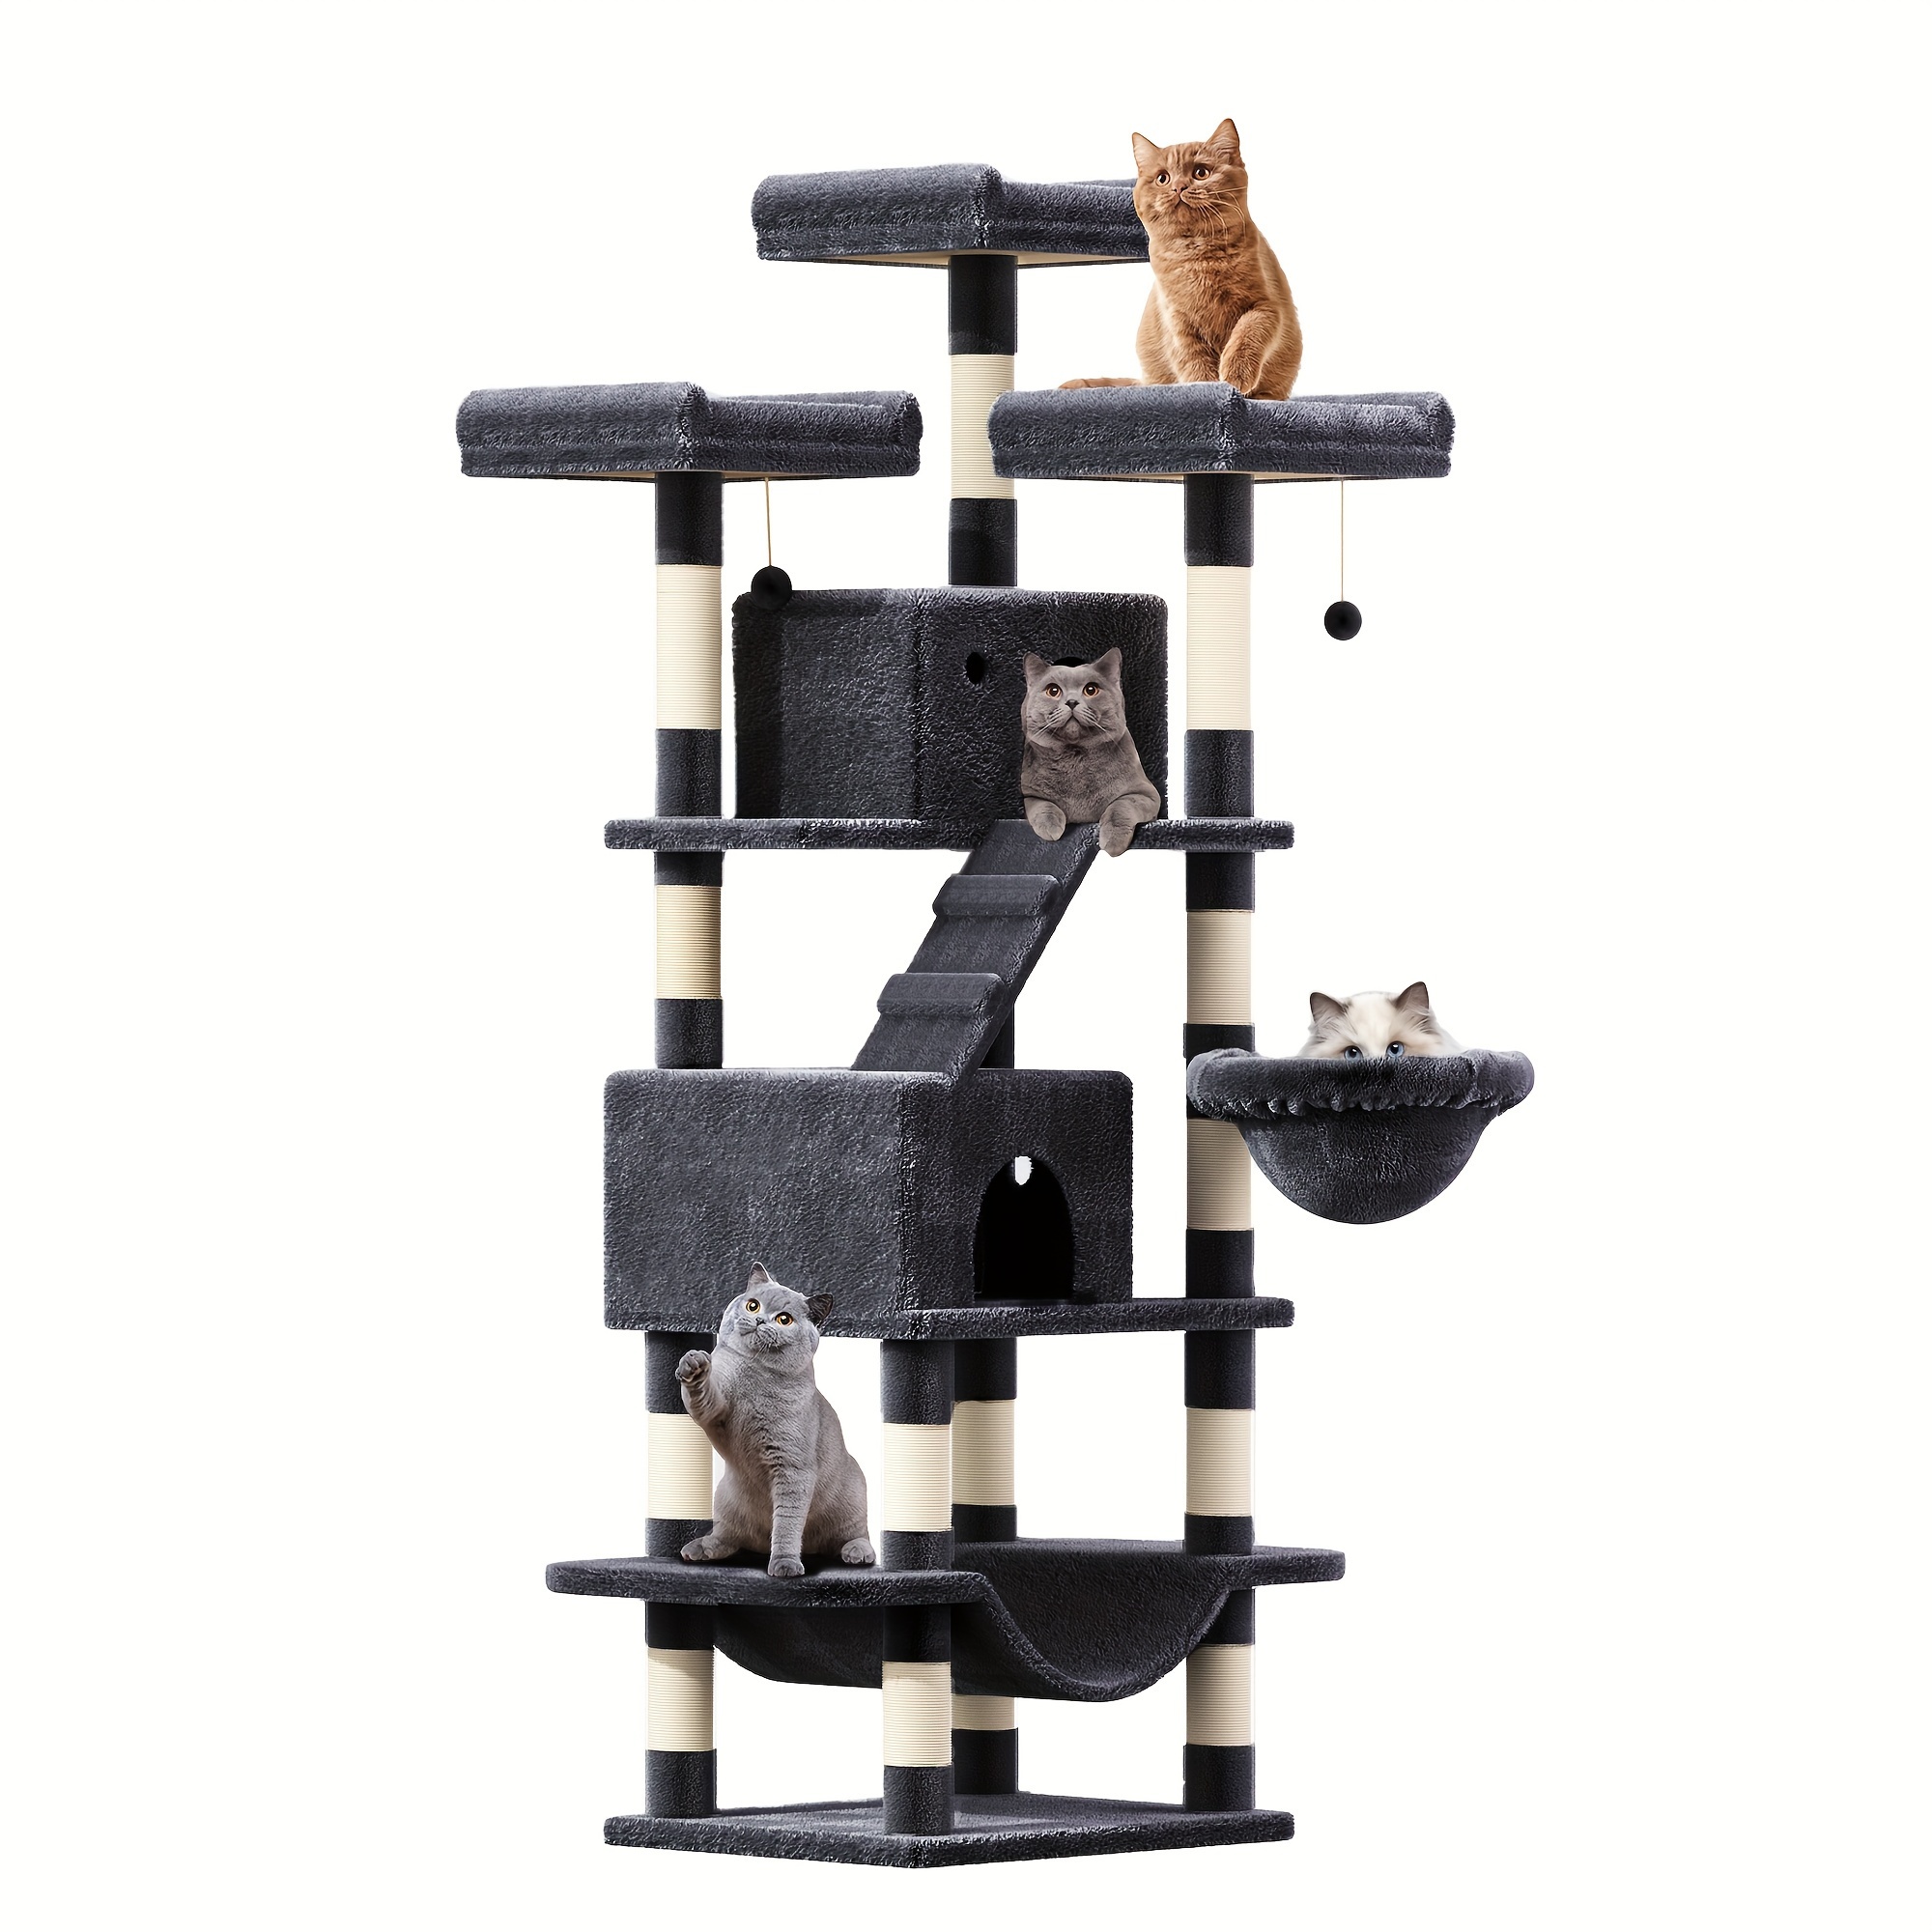 

75" Large Cat Tree, Big Cat Tower For Indoor Cats, Tall Cat Tree With 3 Cushioned Perches, Sisal Scratching Posts, Cozy Basket, 2 Cat Condos (dark Grey)